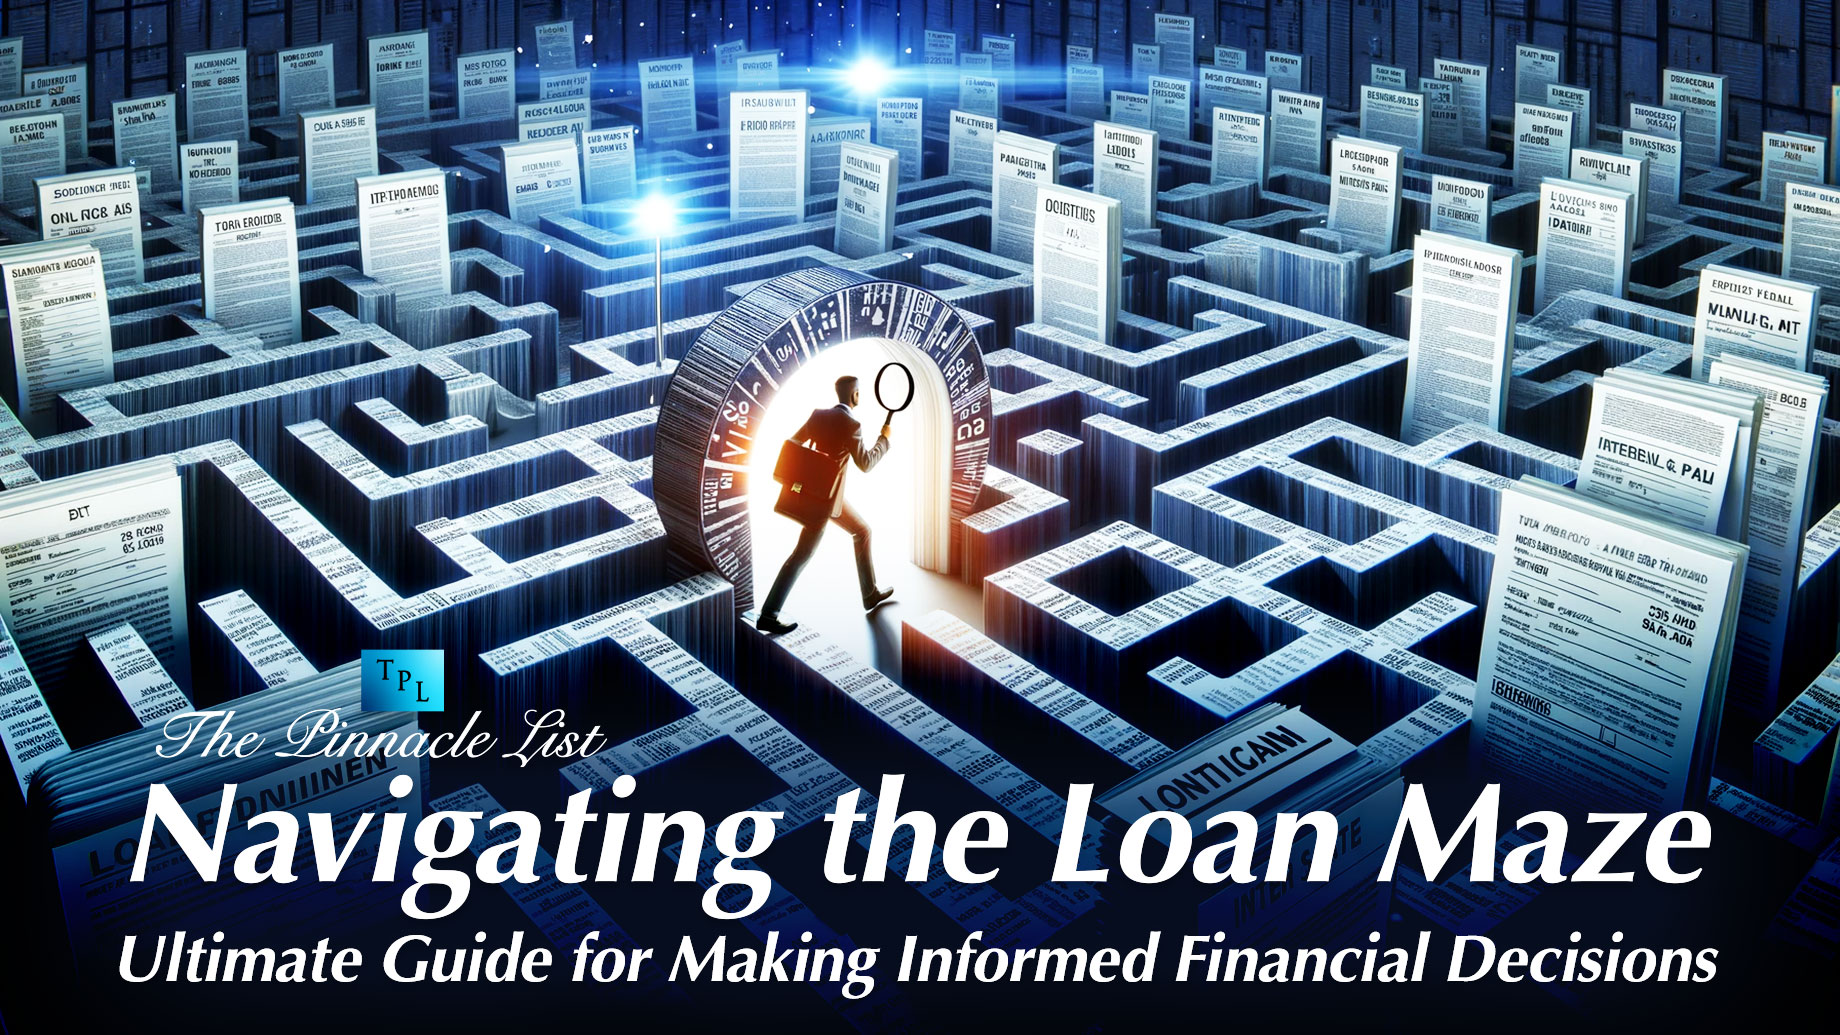 Navigating the Loan Maze: Ultimate Guide for Making Informed Financial Decisions